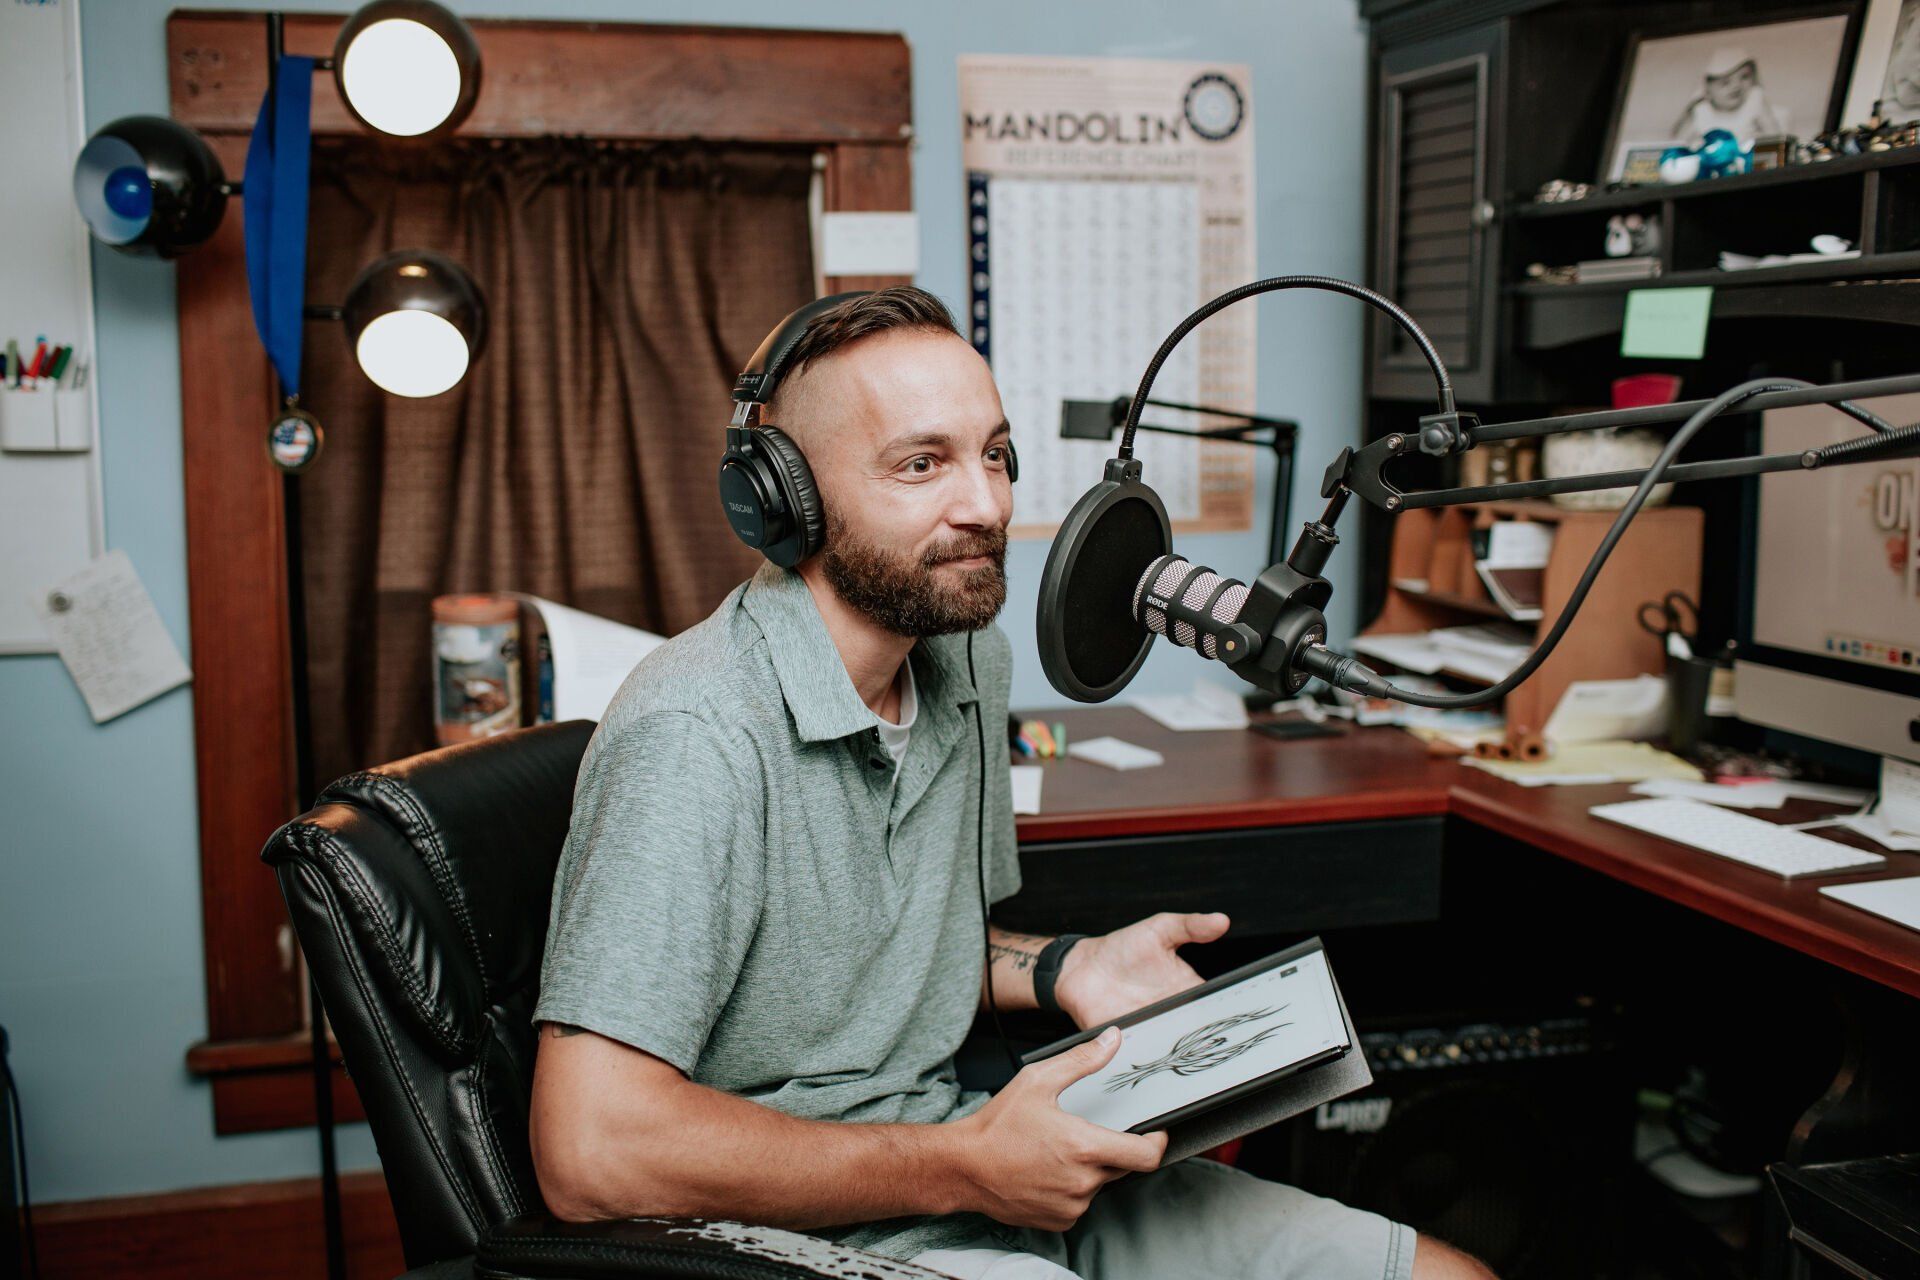 A man wearing headphones is sitting in front of a microphone.